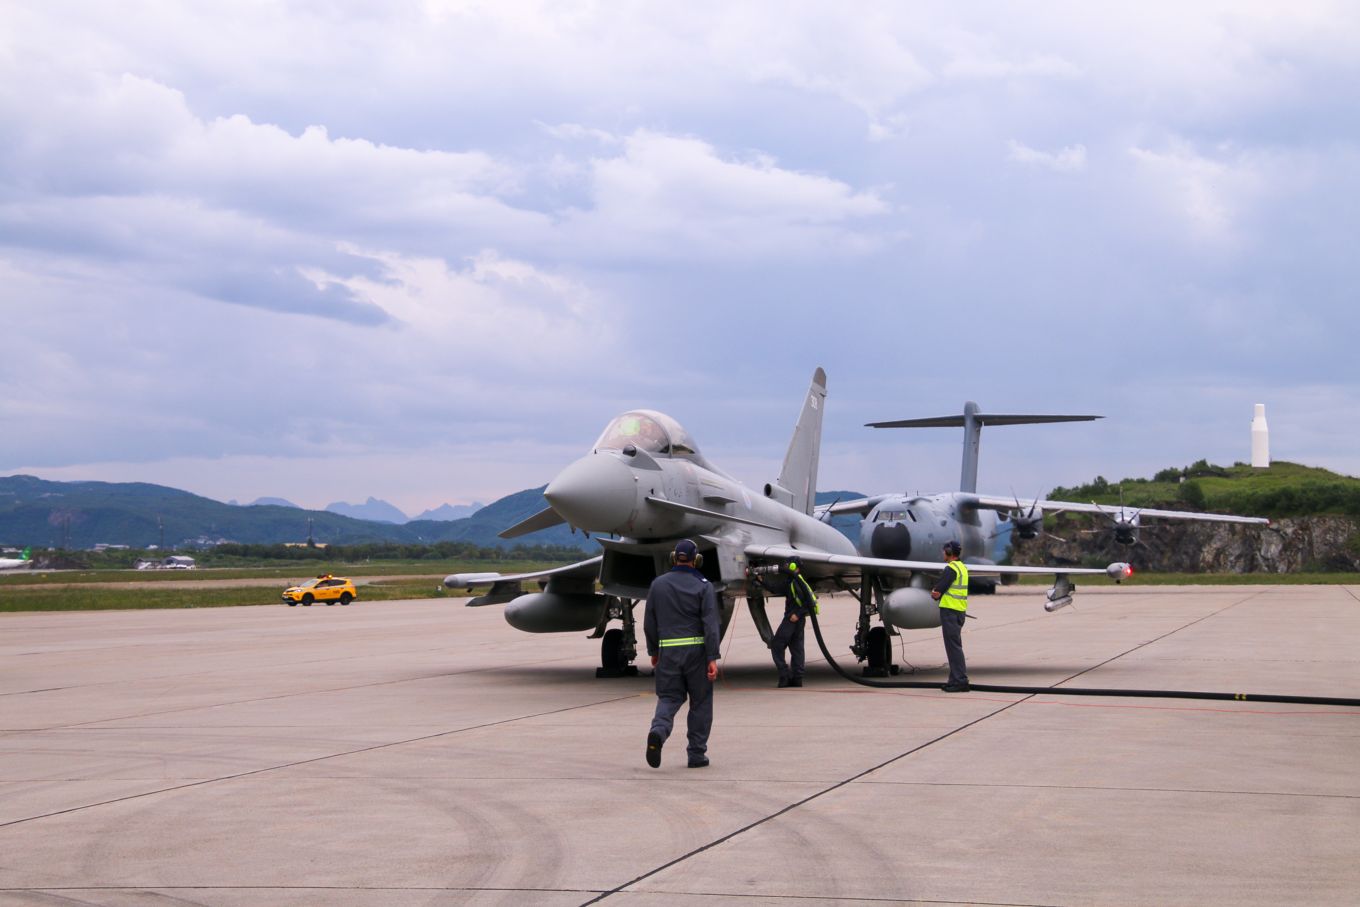 Typhoon being refuelled, with A400M Atlas and personnel. 